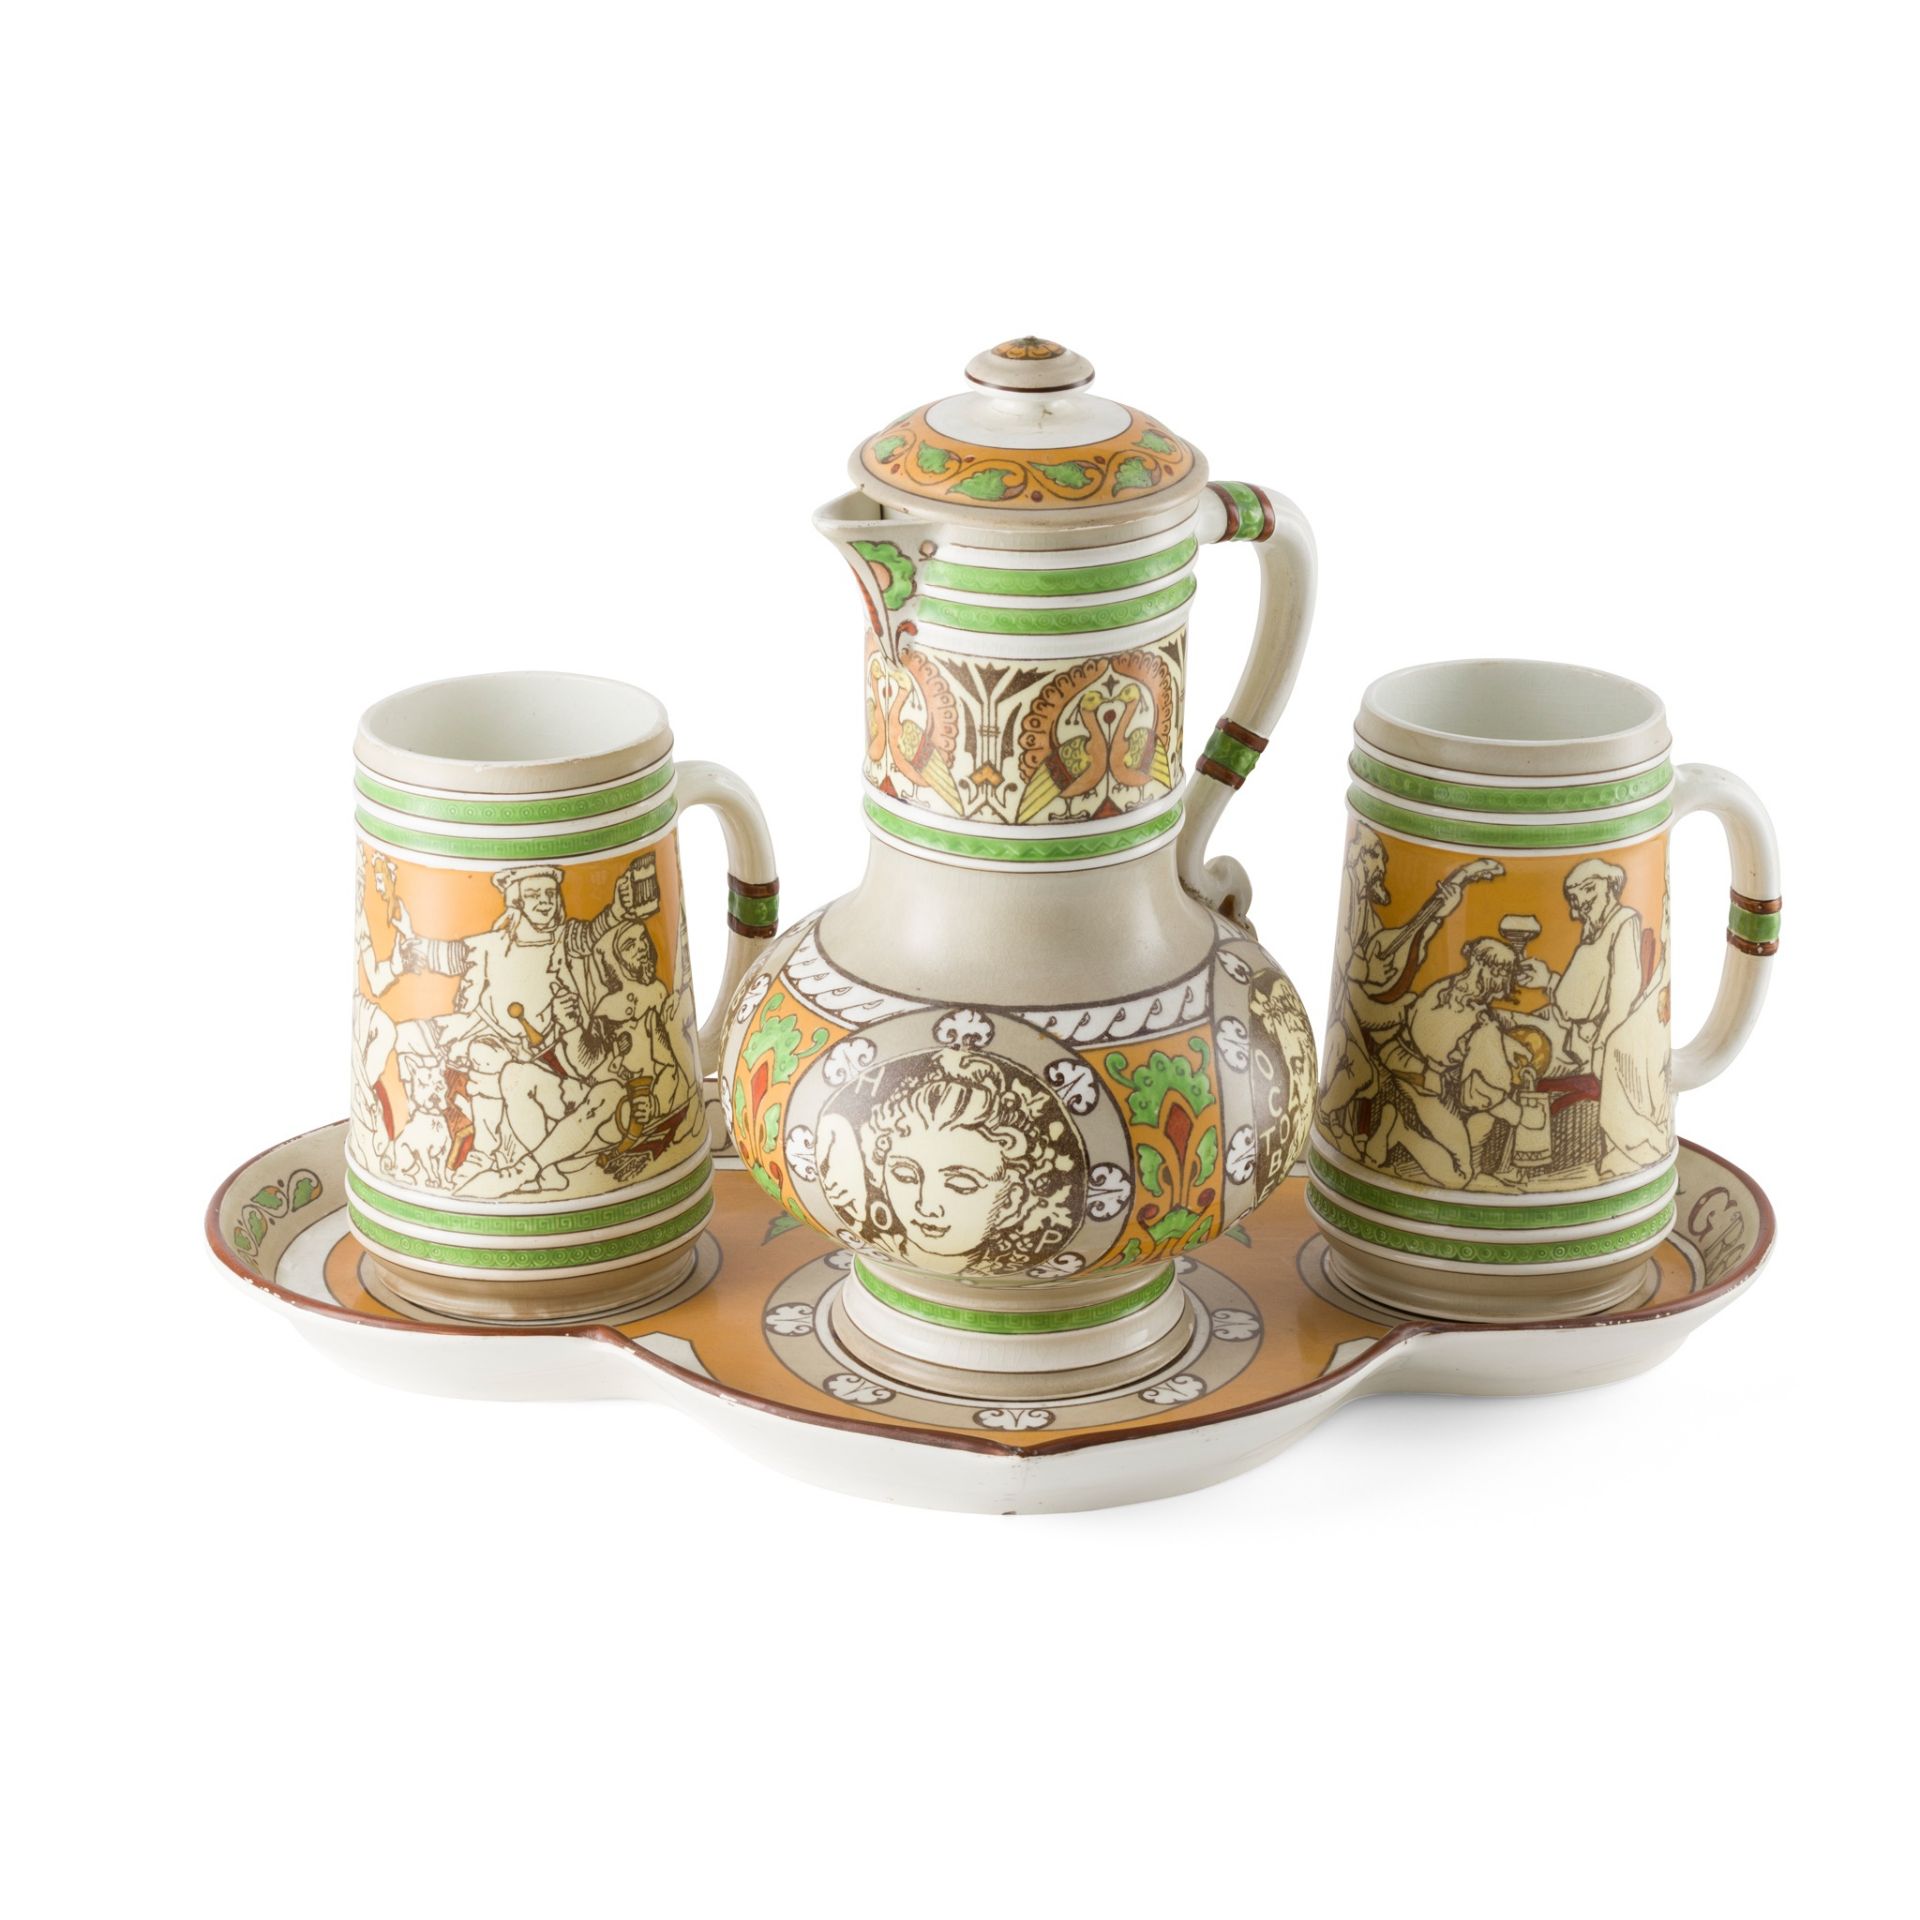 HENRY STACY MARKS (1829-1898) AND CHRISTOPHER DRESSER (1834-1904) FOR MINTON & CO. BEER SET, CIRCA